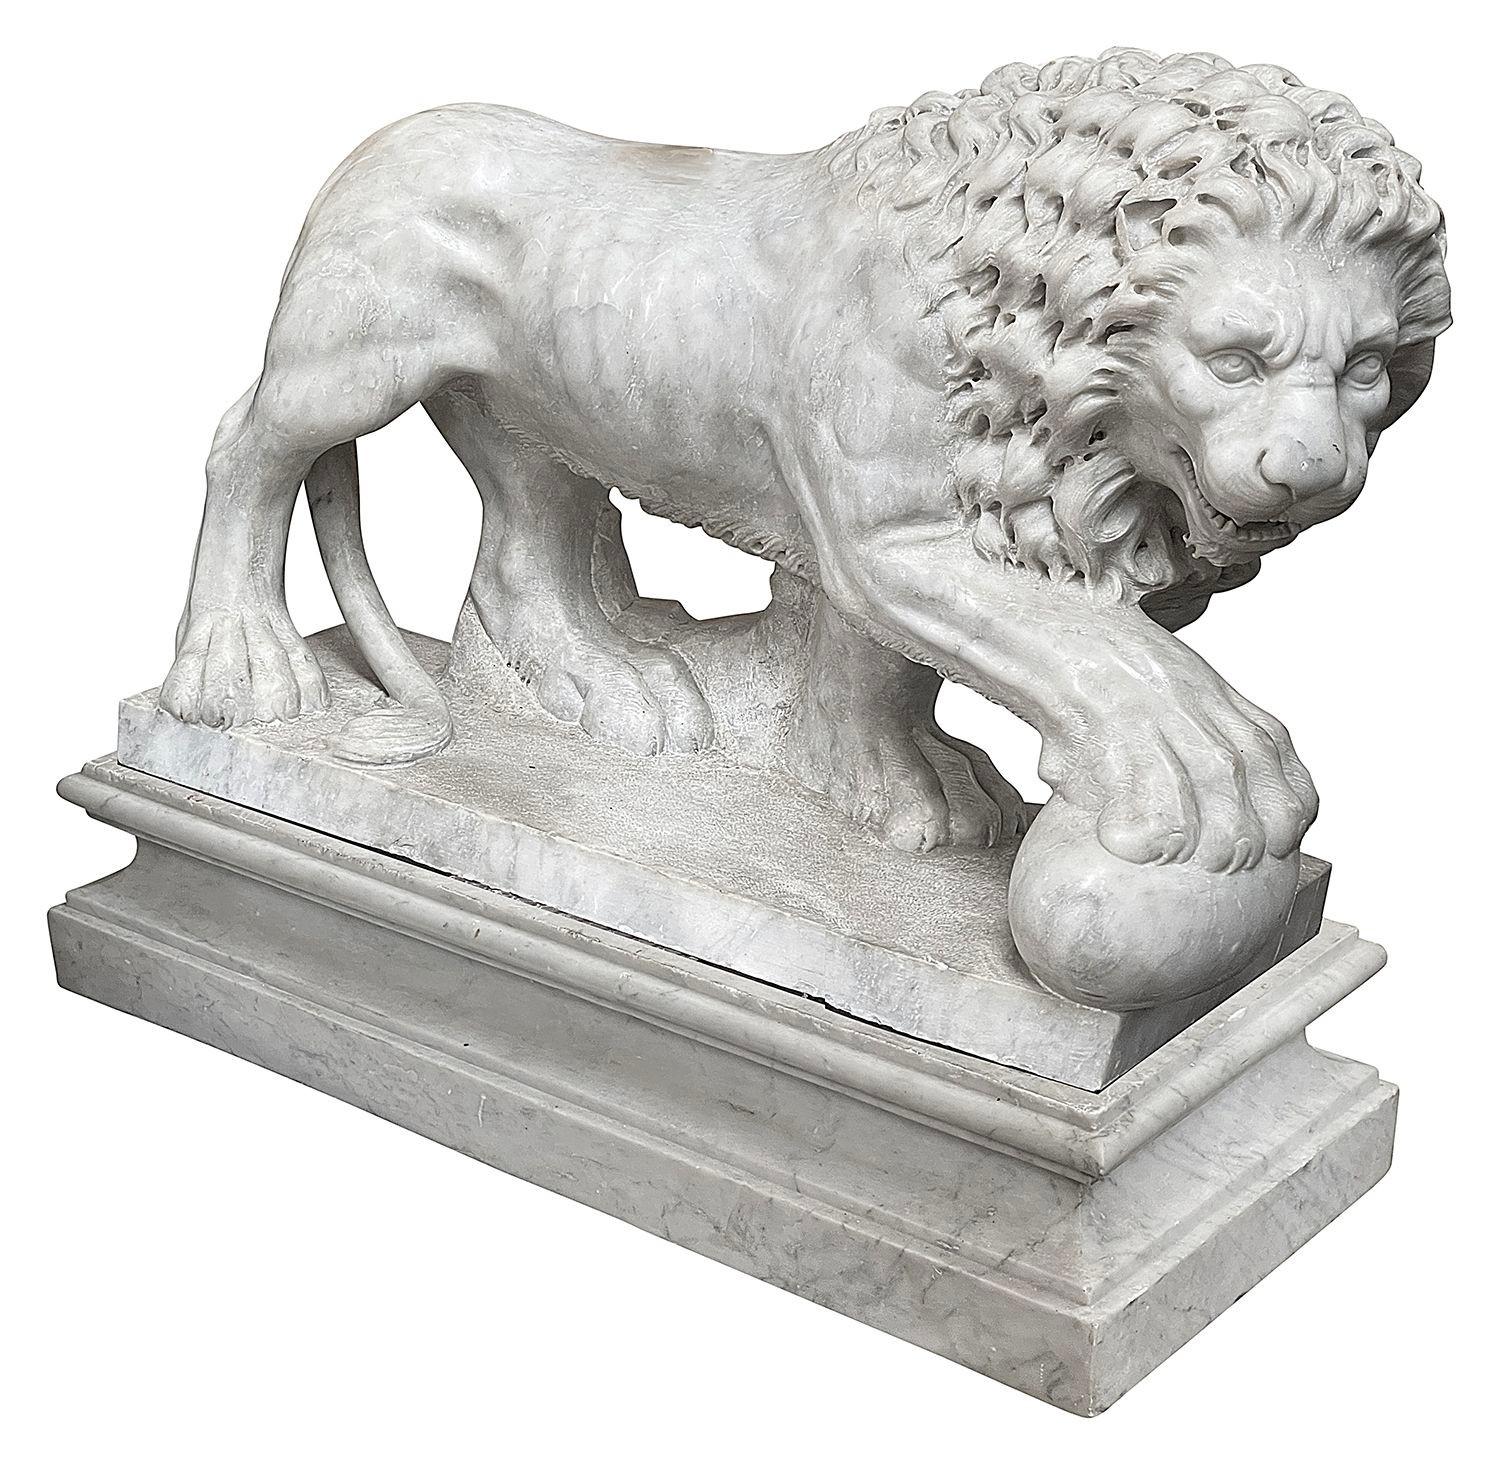 A wonderfully impressive pair of 19th century Italian, carrara Marble statues of the Medici Lions, having fine detailed carving and raised on plinth bases, circa 1810.
 
 
Batch 73 62115 DNDKZZ.